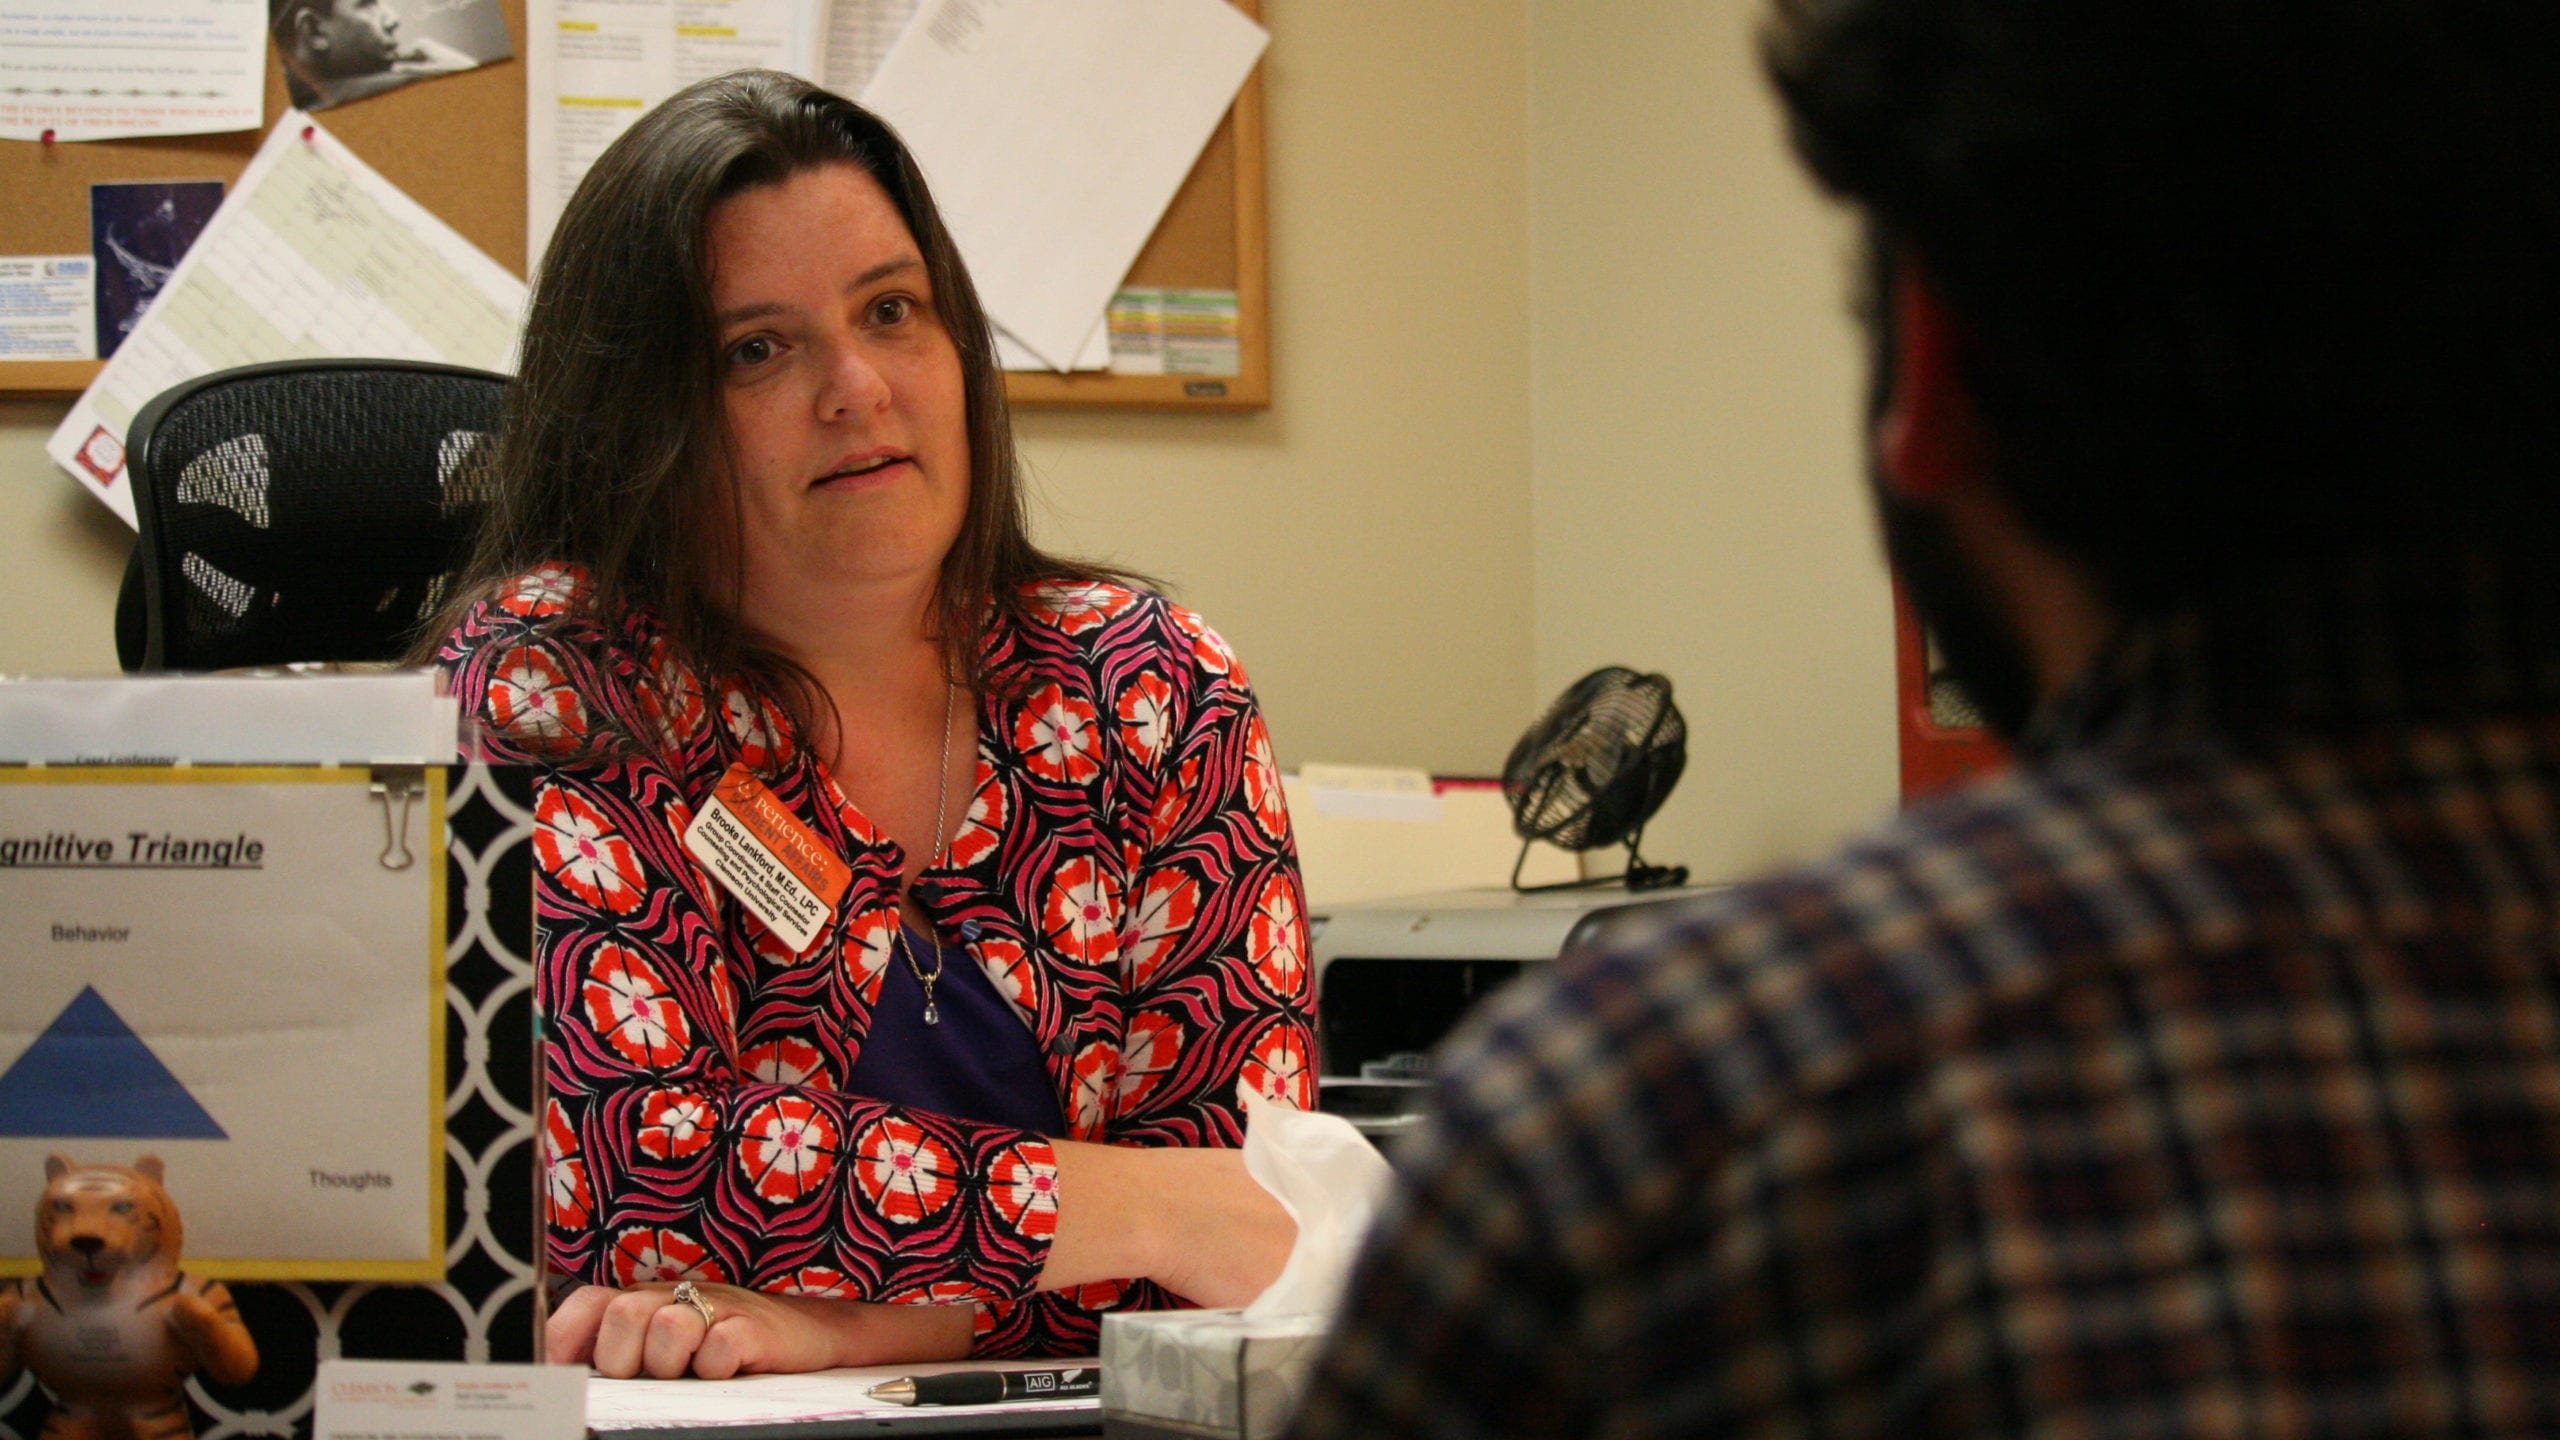 Dr. Brooke Lankford, who coordinates group services for Counseling and Psychological Services (CAPS) at Clemson